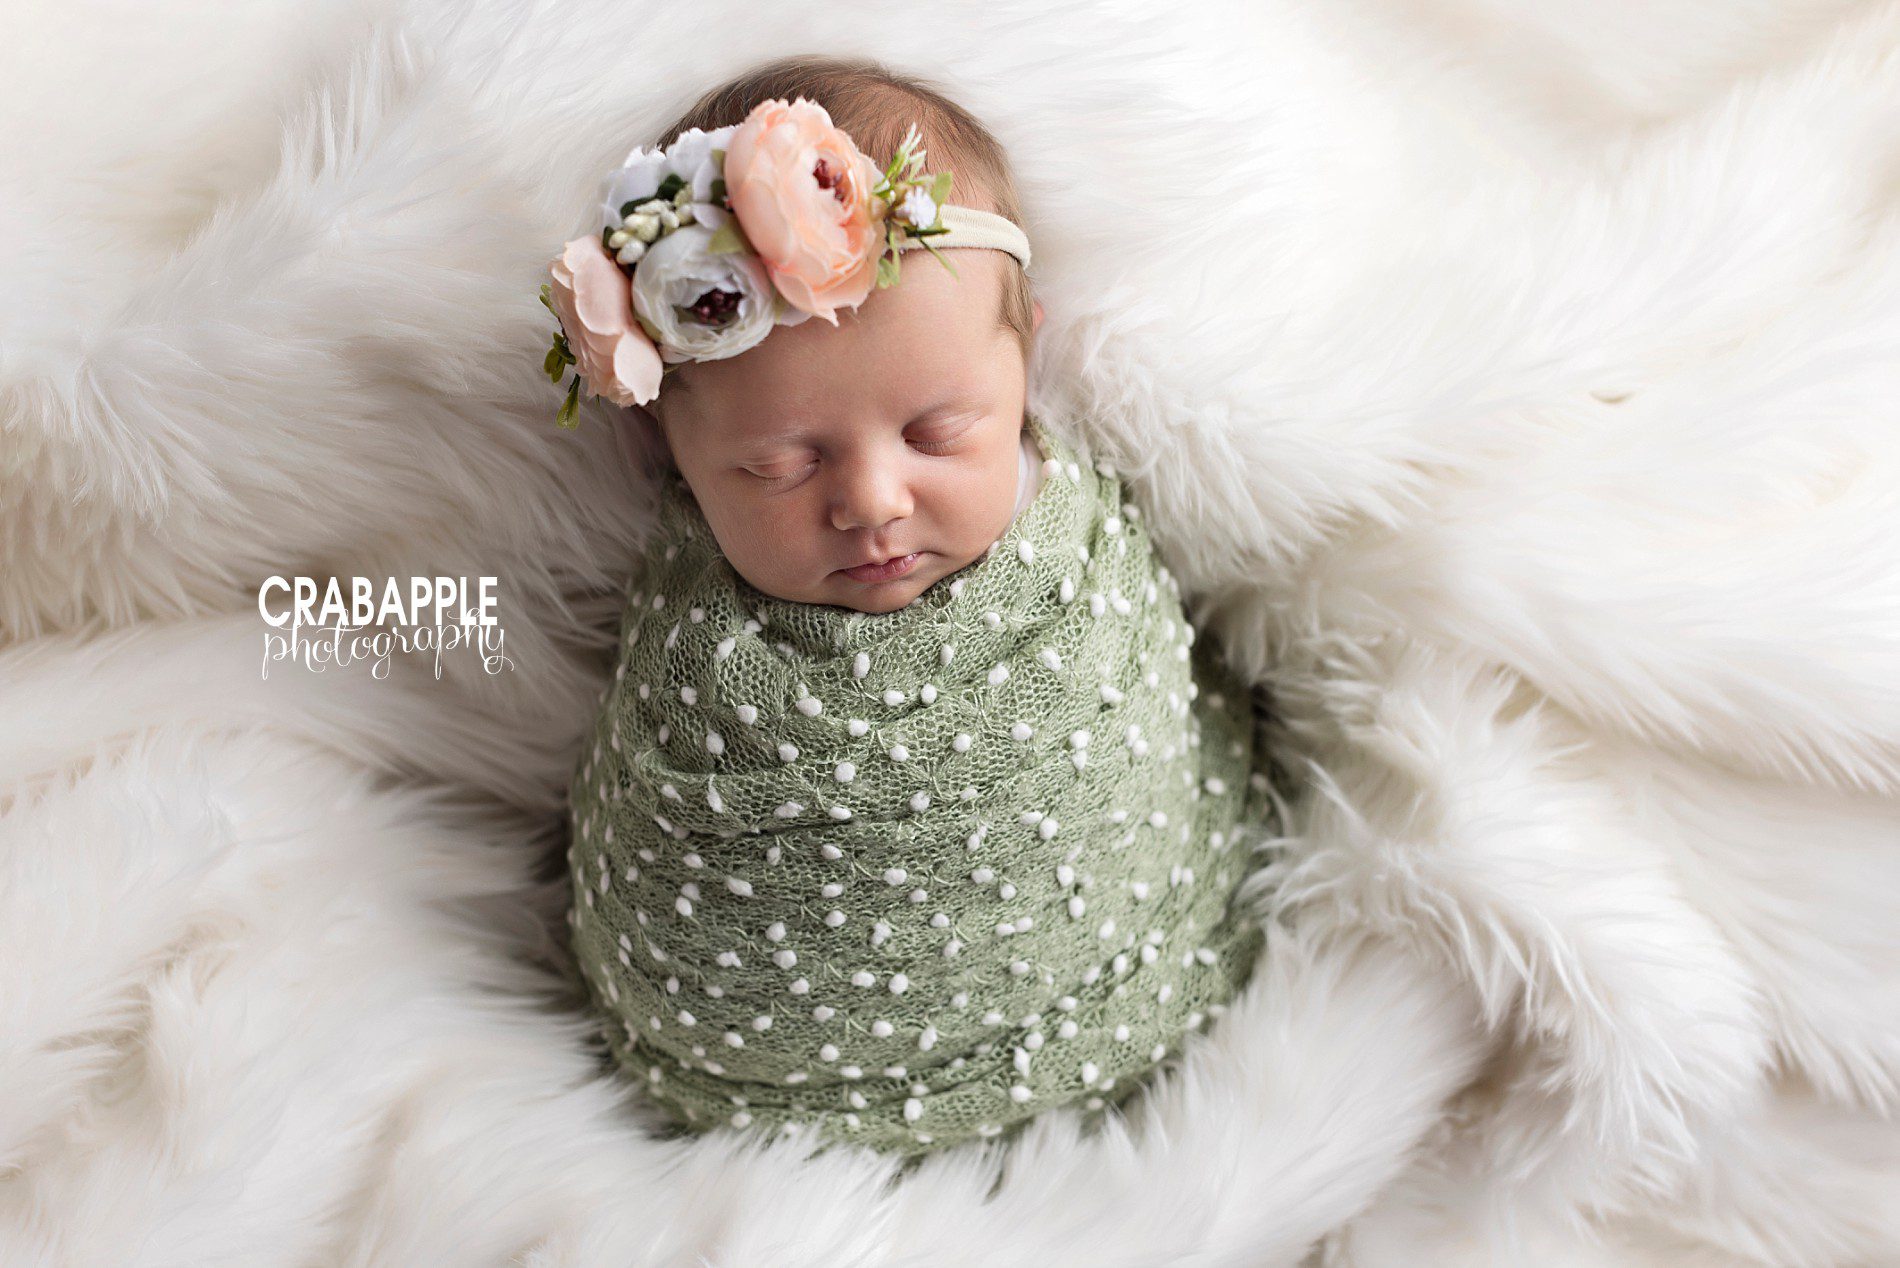 styling inspiration for newborn pictures for girls